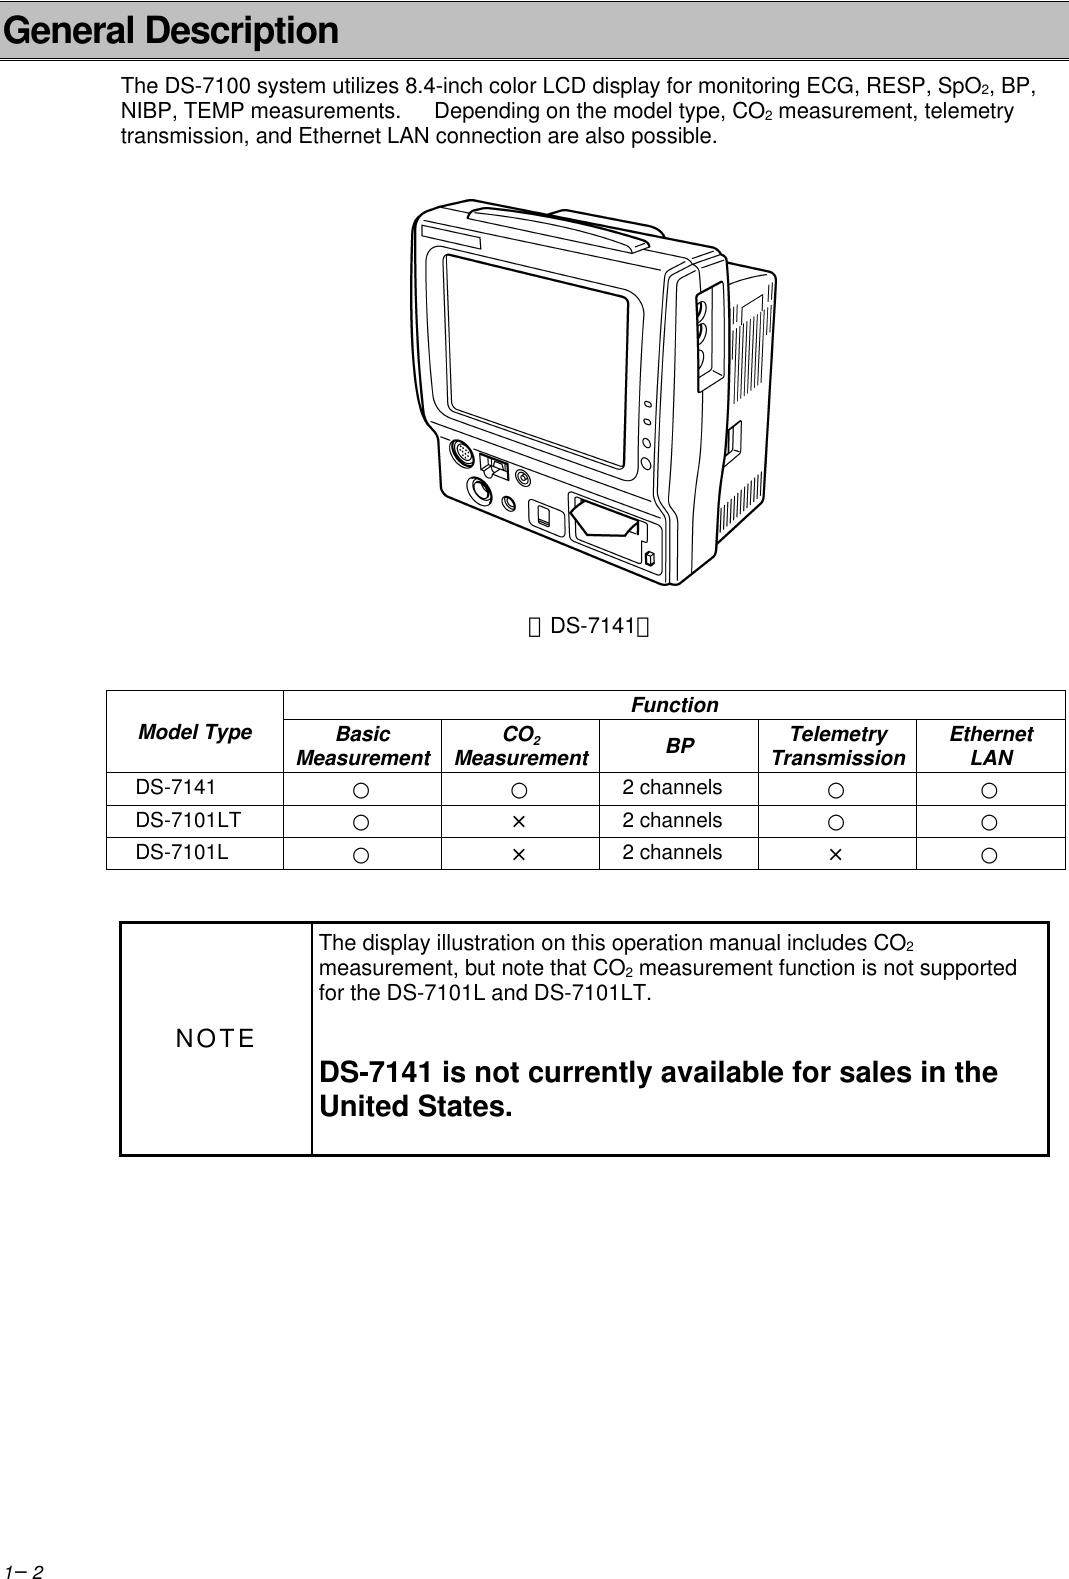 1−2General DescriptionThe DS-7100 system utilizes 8.4-inch color LCD display for monitoring ECG, RESP, SpO2, BP,NIBP, TEMP measurements.   Depending on the model type, CO2 measurement, telemetrytransmission, and Ethernet LAN connection are also possible.＜DS-7141＞FunctionModel Type BasicMeasurement CO2Measurement BP TelemetryTransmission EthernetLANDS-7141 ○ ○ 2 channels ○ ○DS-7101LT ○ × 2 channels ○ ○DS-7101L ○ × 2 channels × ○NOTEThe display illustration on this operation manual includes CO2measurement, but note that CO2 measurement function is not supportedfor the DS-7101L and DS-7101LT.DS-7141 is not currently available for sales in theUnited States.